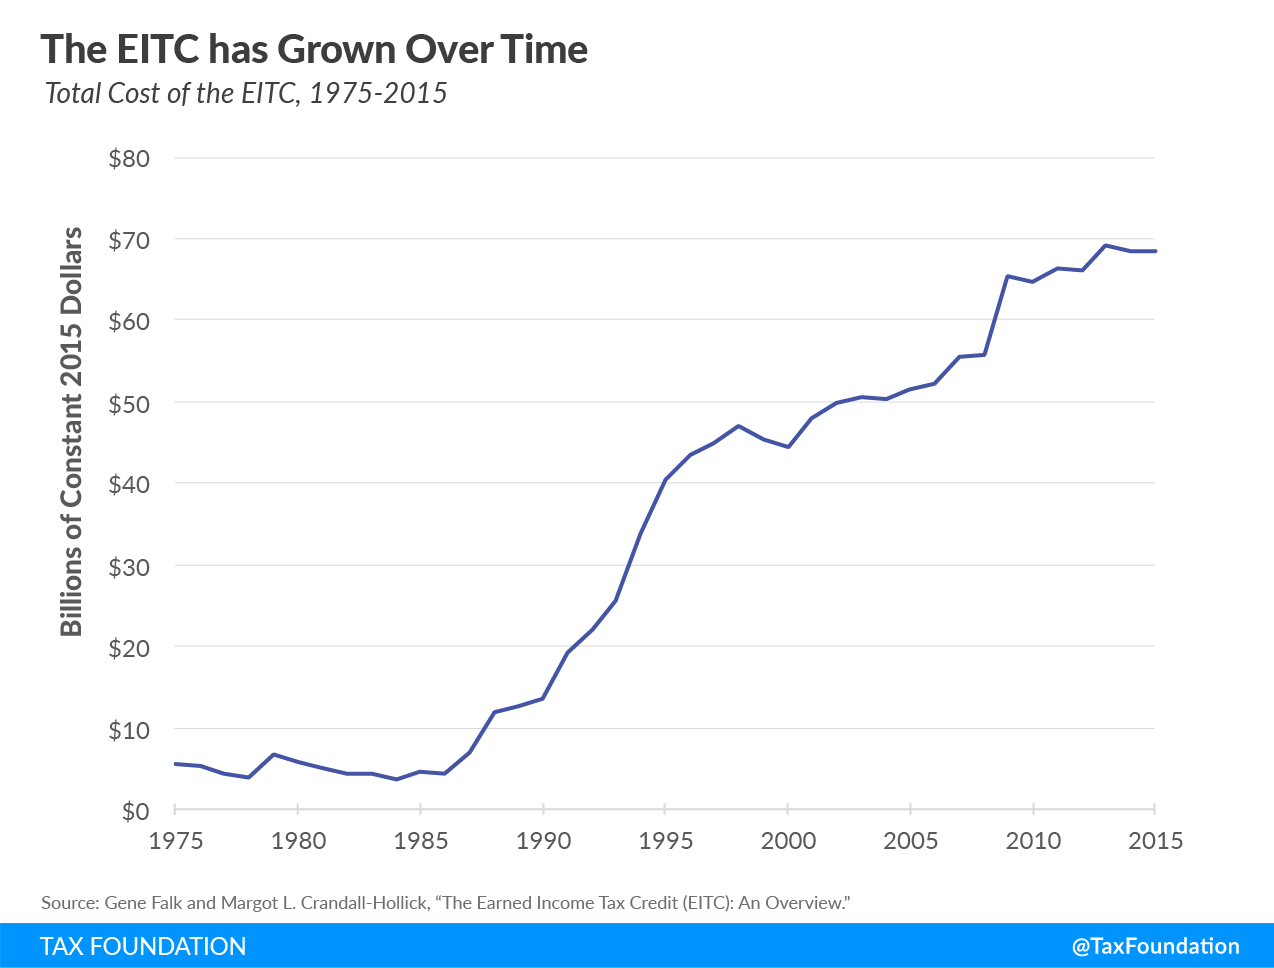 The EITC has grown over time, earned income tax credit